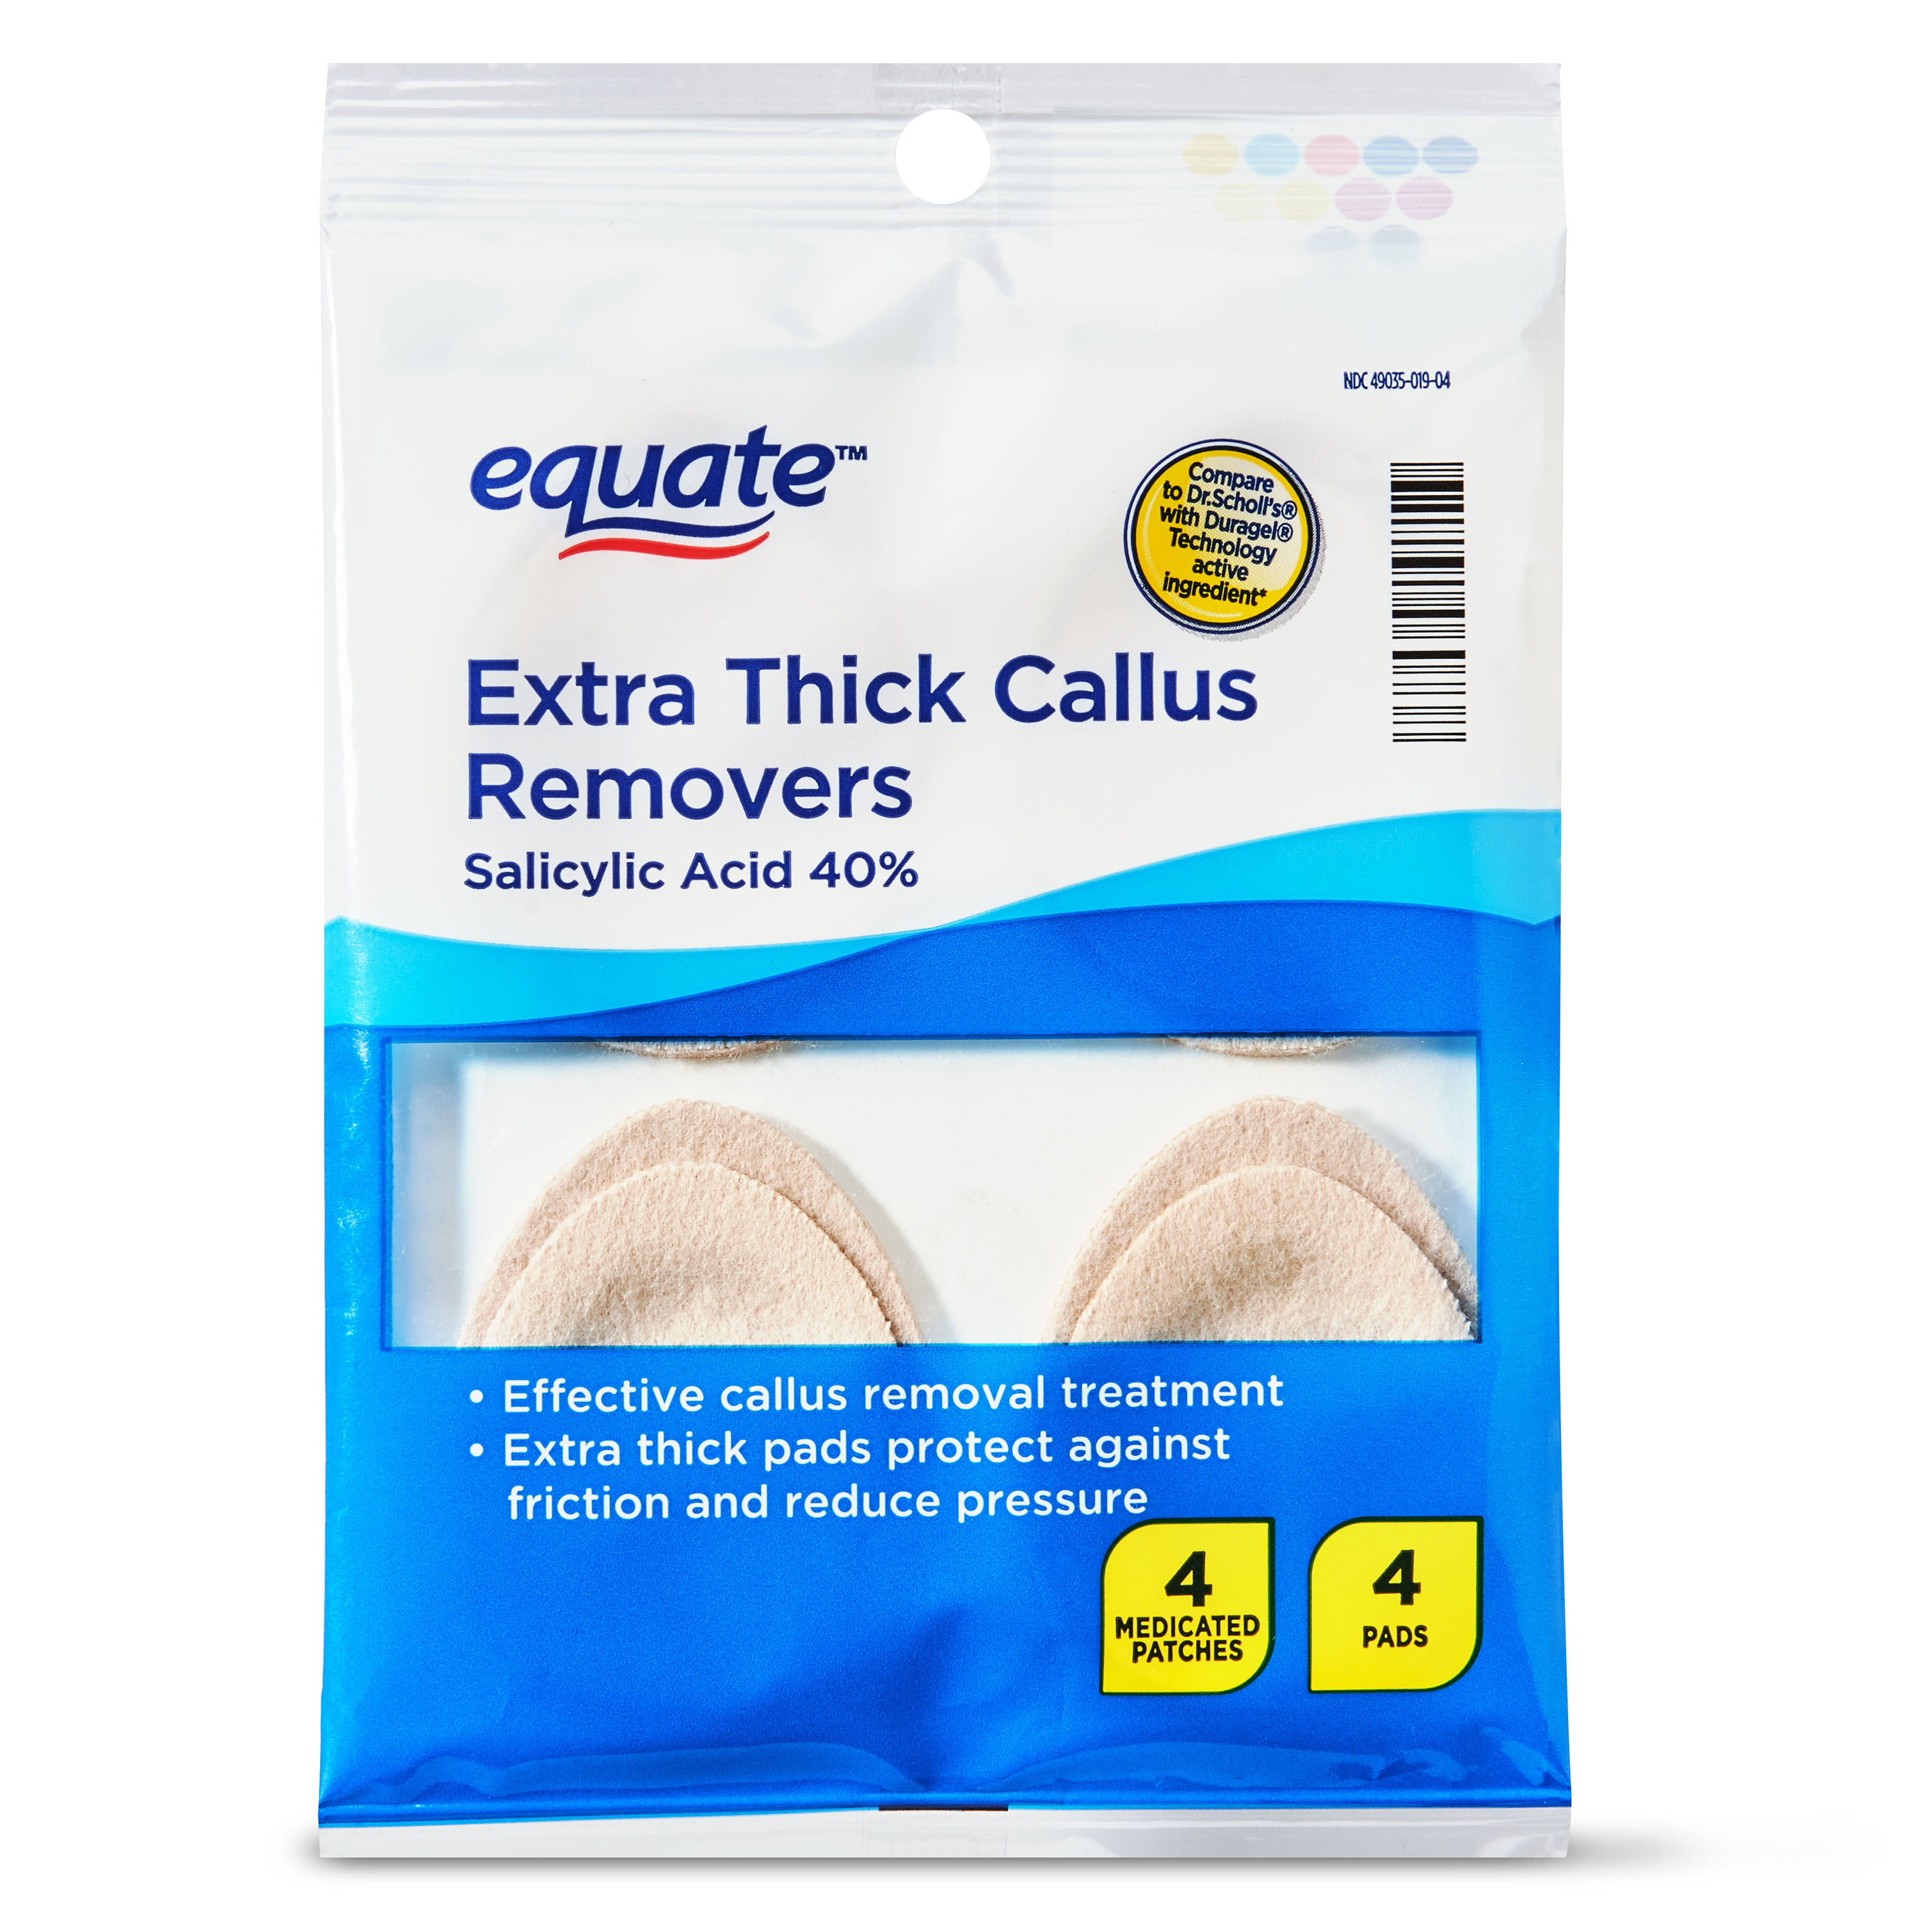 dr scholl's extra thick callus remover